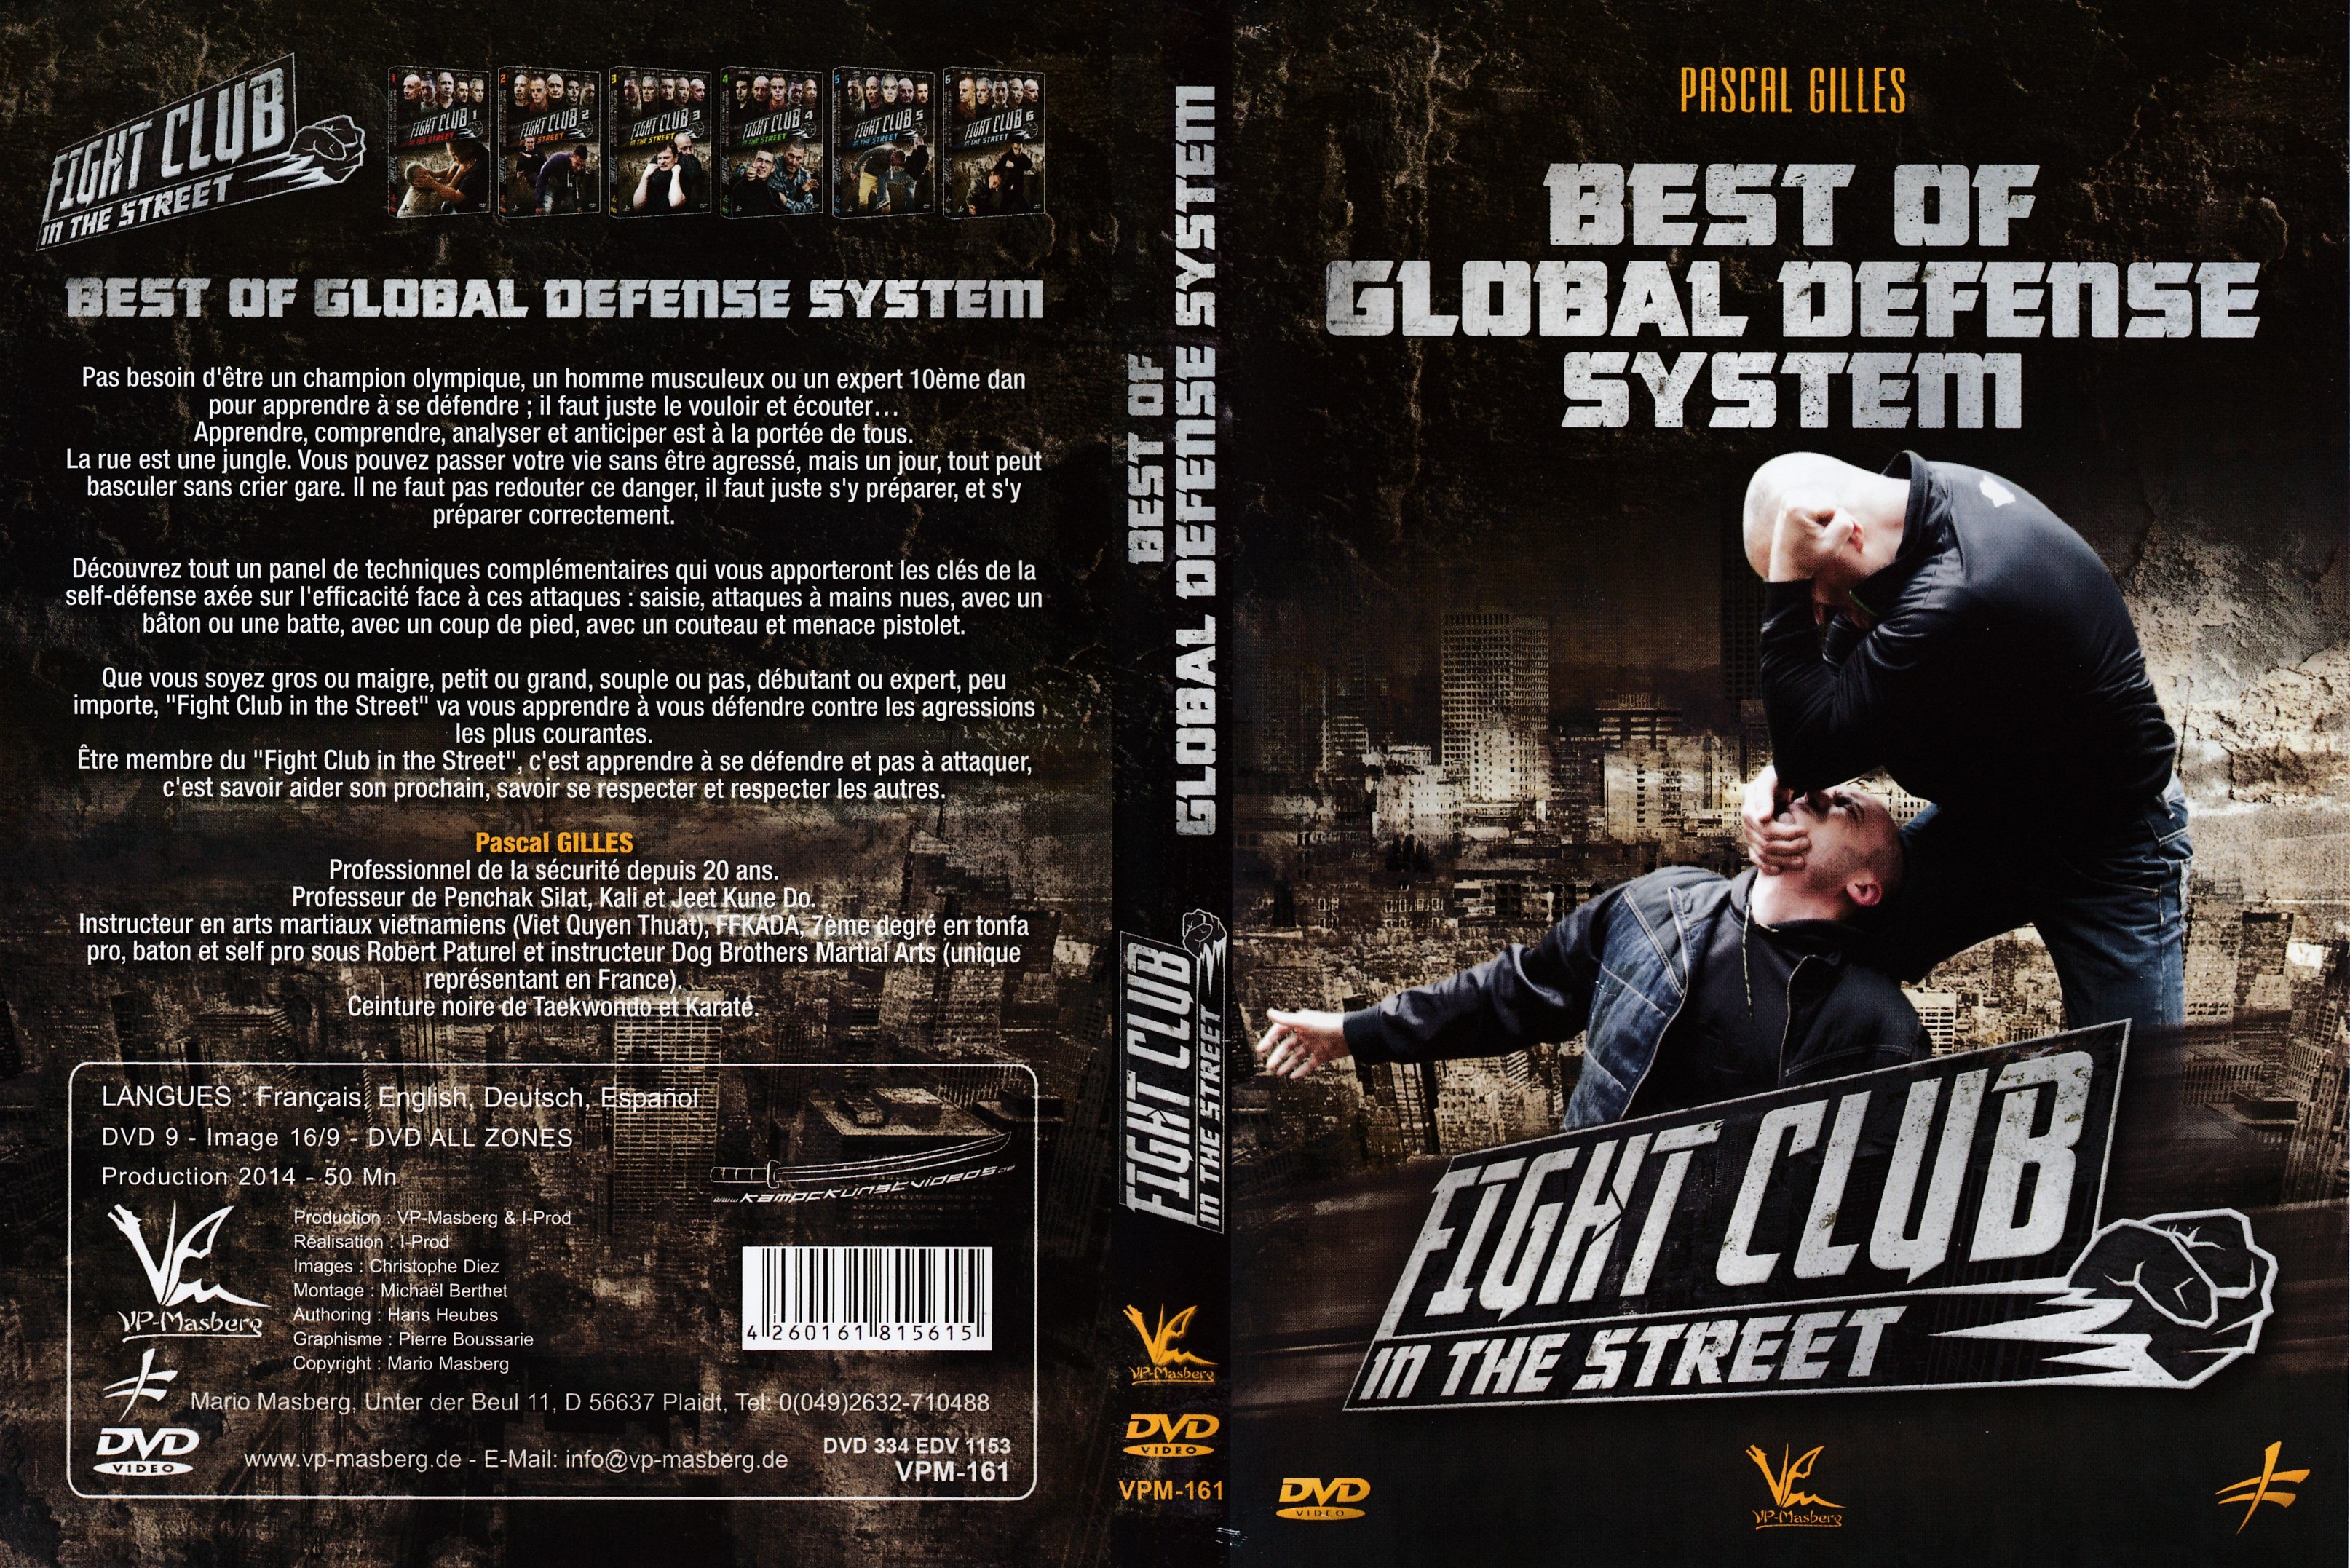 Jaquette DVD Best of global defense system - fight club in the street